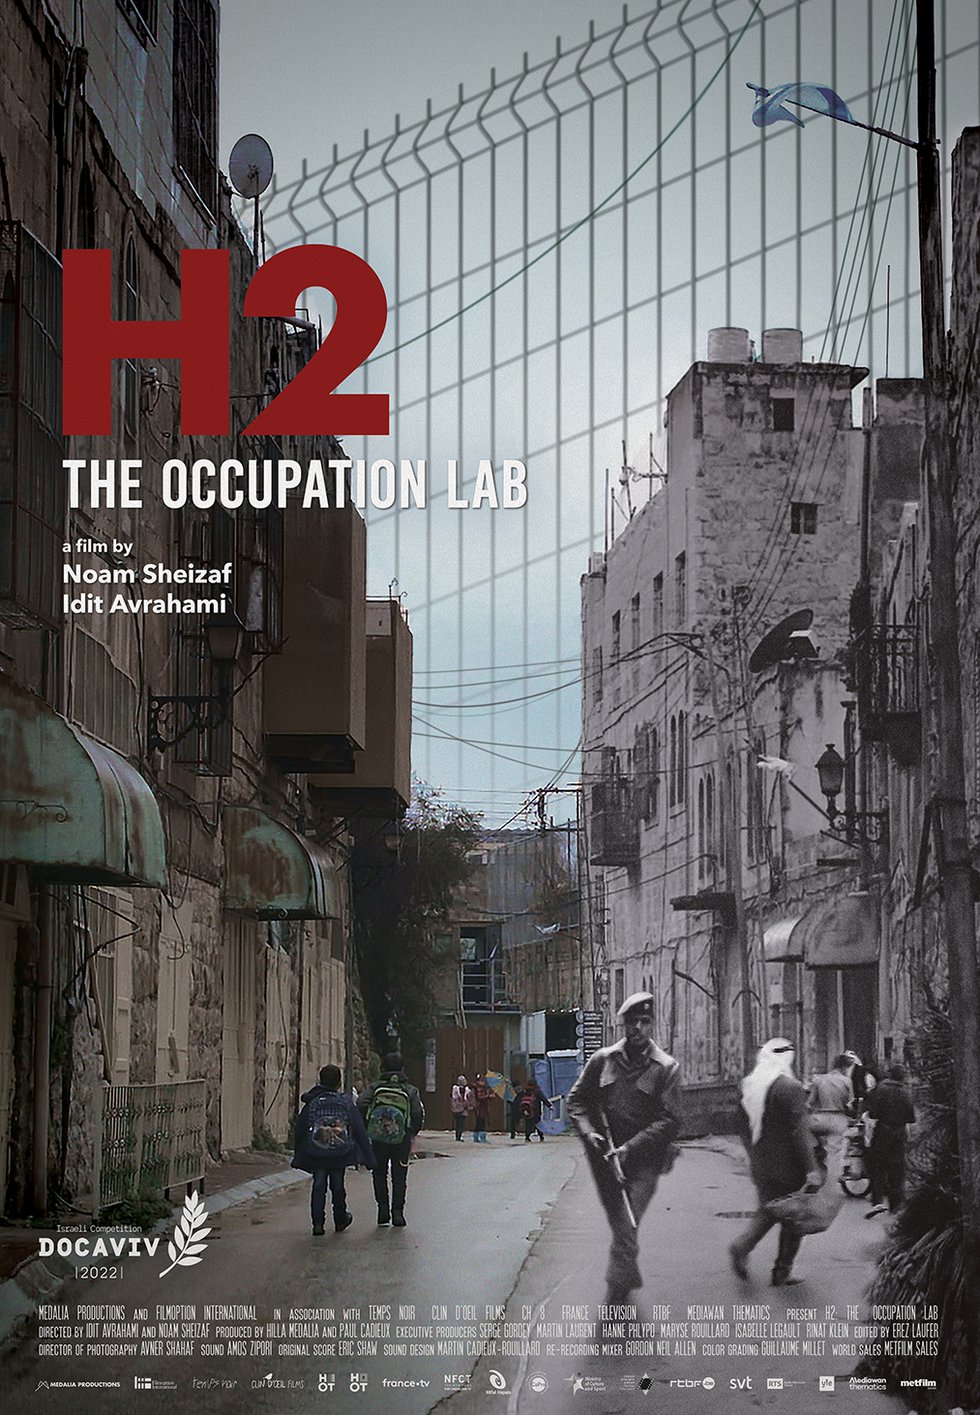 H2: The Occupation Lab History Documentary